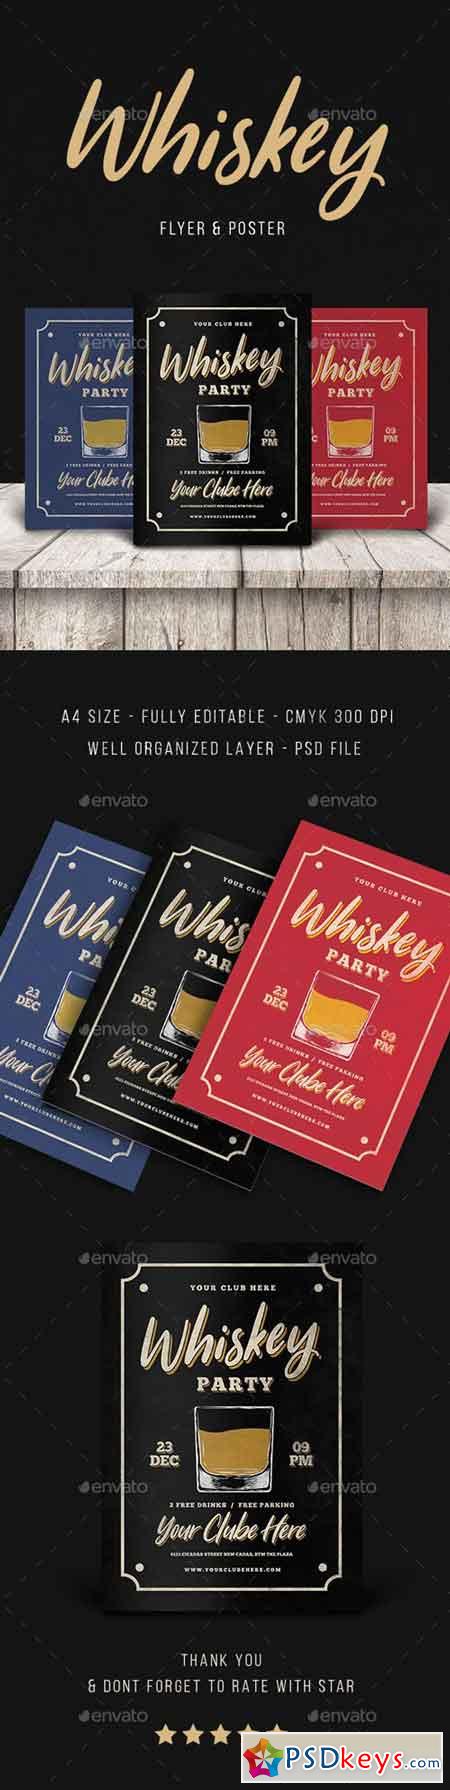 Vintage Whisky Party 20736090